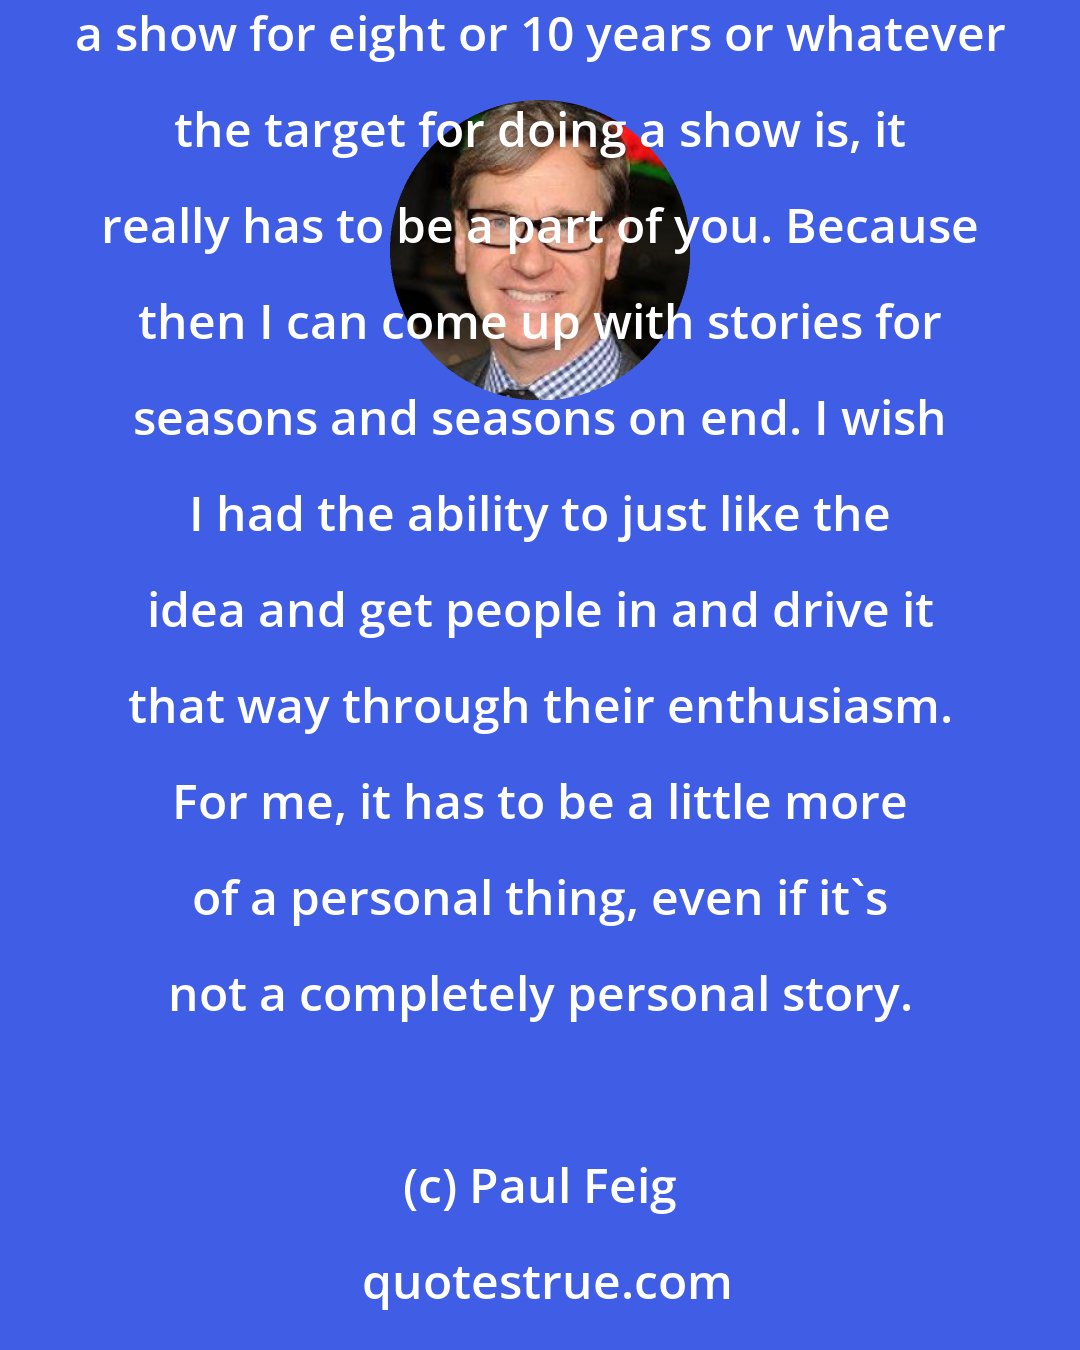 Paul Feig: I really put my heart and soul into everything and I don't want a project that doesn't feel real to me or I don't get invested in. In order to drive a show for eight or 10 years or whatever the target for doing a show is, it really has to be a part of you. Because then I can come up with stories for seasons and seasons on end. I wish I had the ability to just like the idea and get people in and drive it that way through their enthusiasm. For me, it has to be a little more of a personal thing, even if it's not a completely personal story.